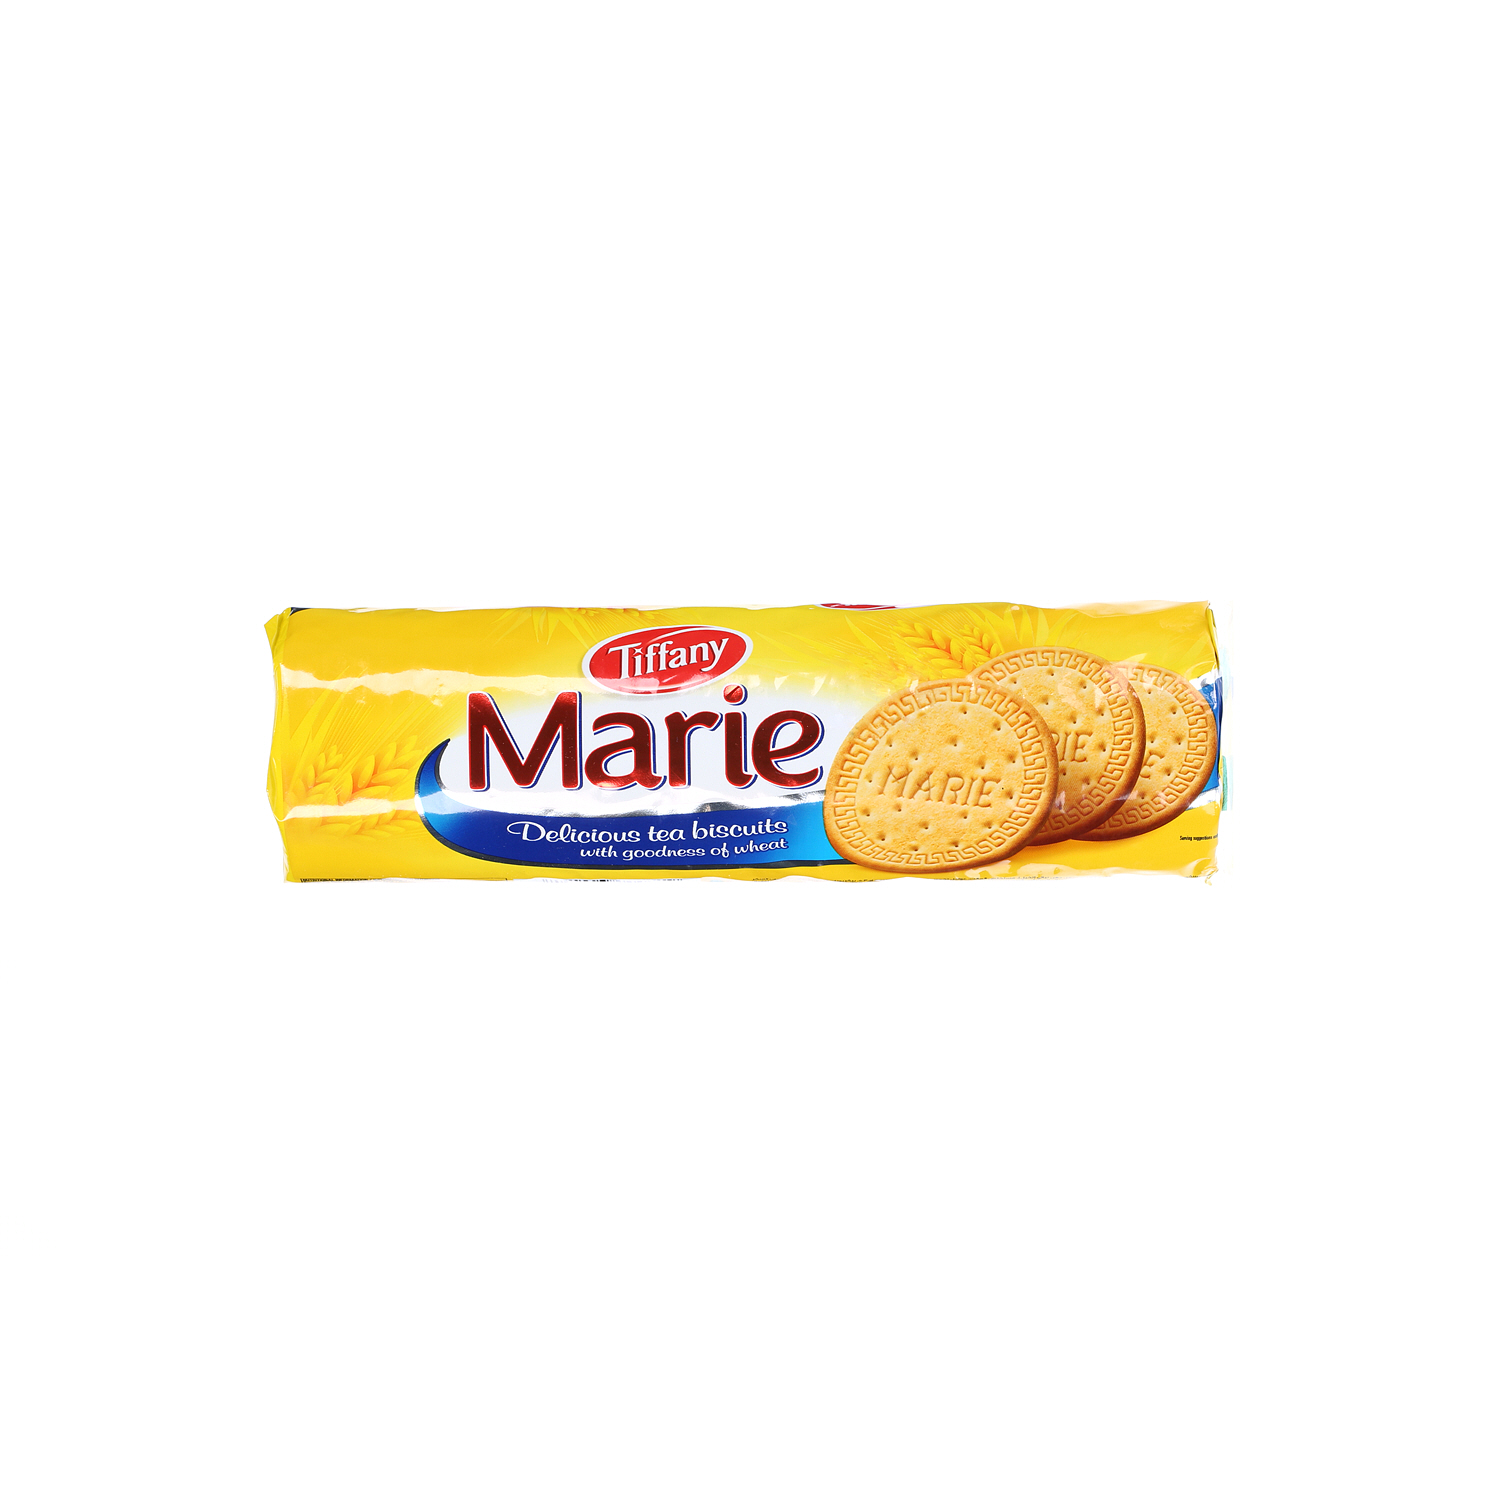 Tiffany Marie Biscuit 200gm